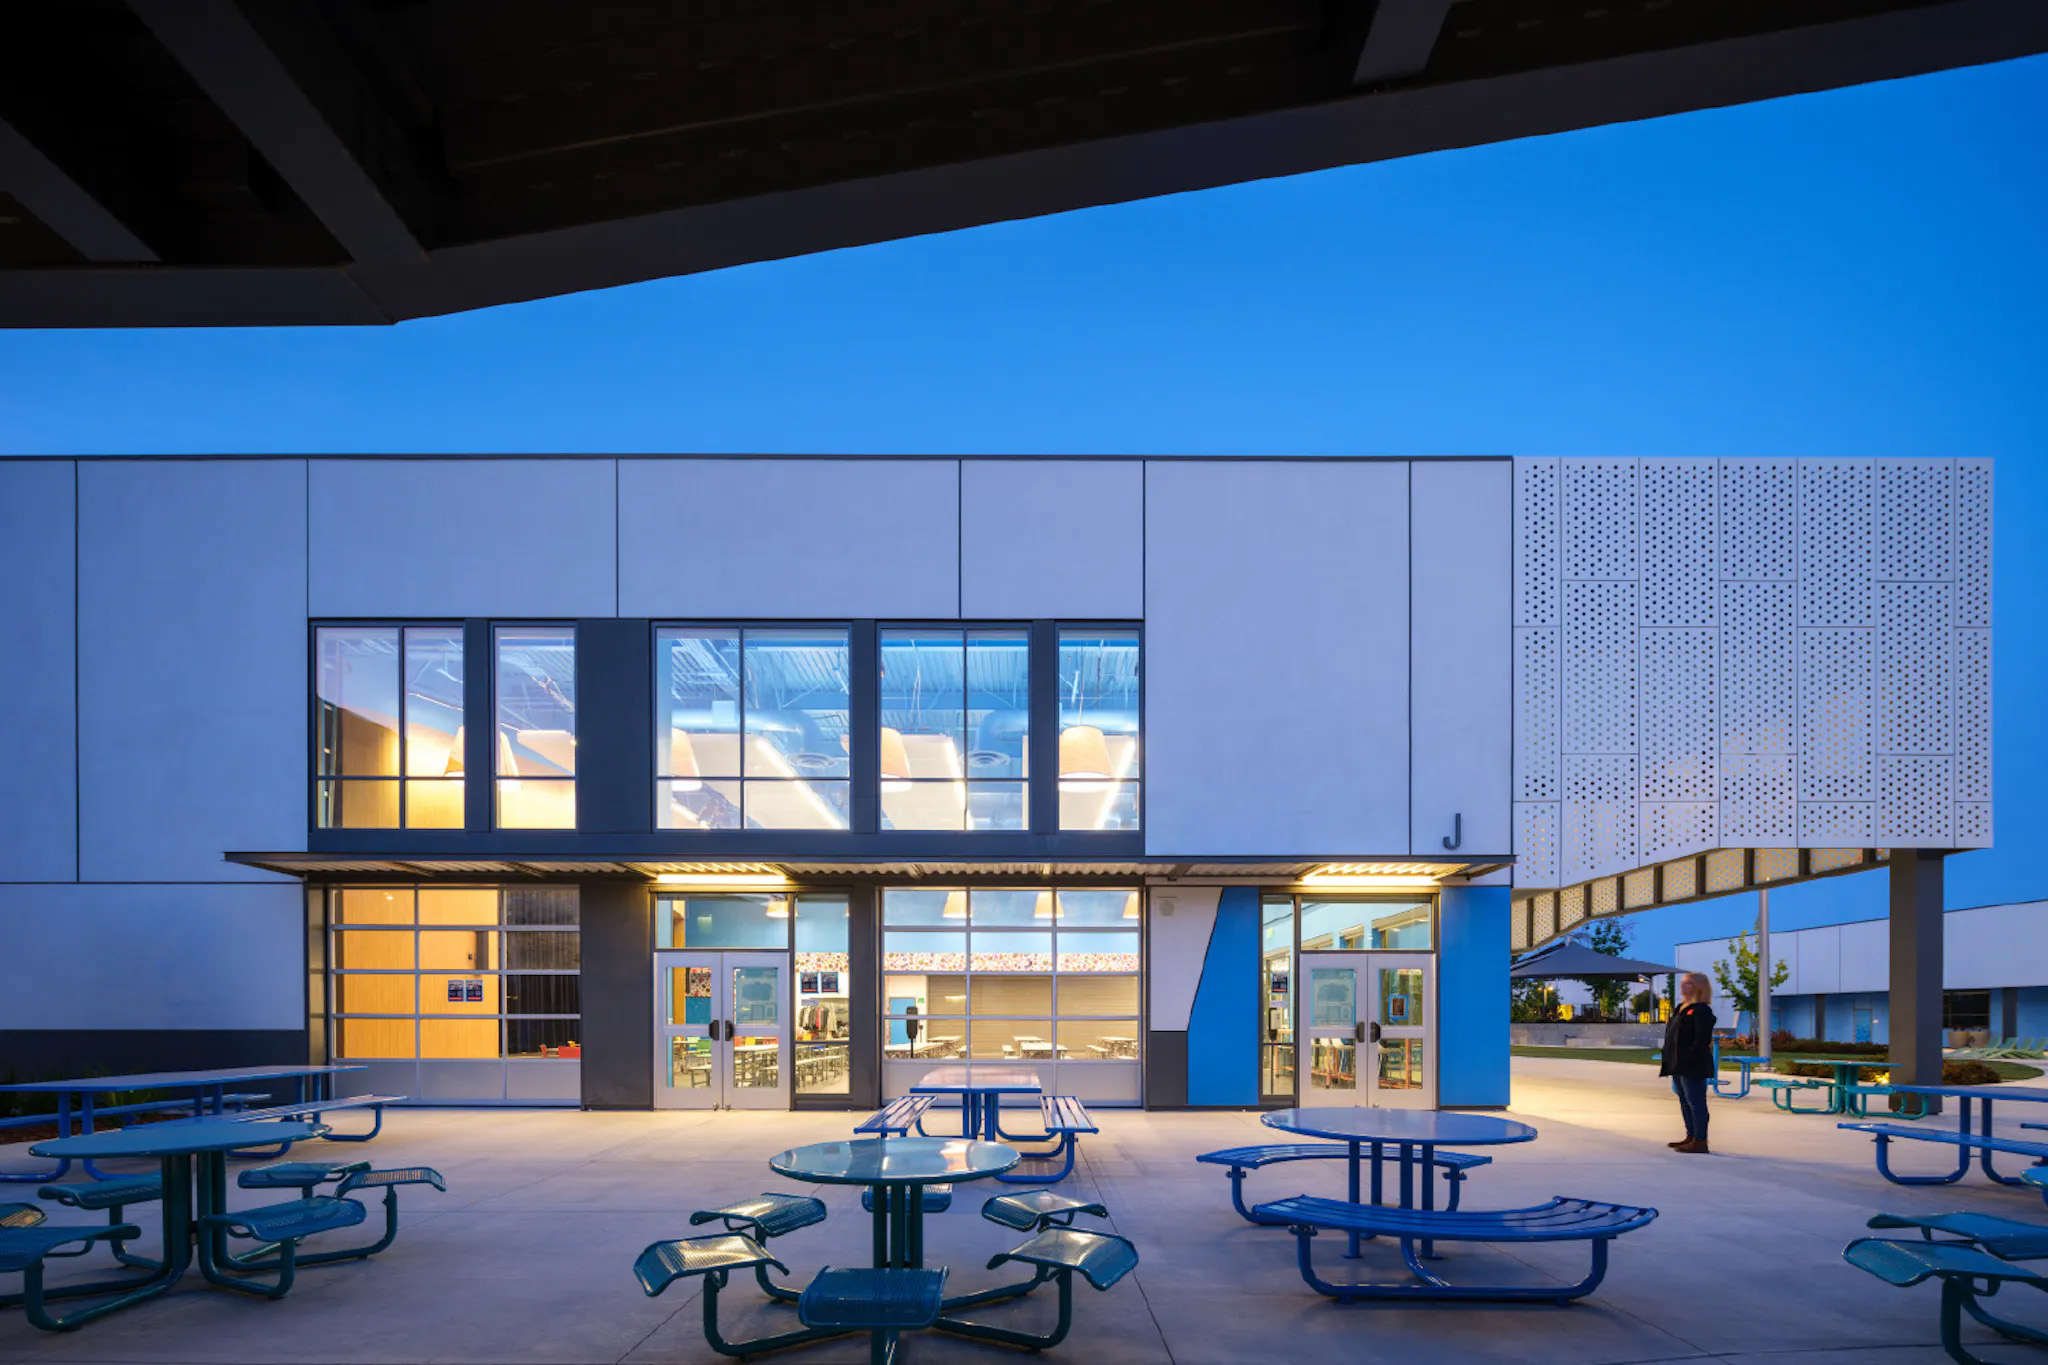 Outdoor spaces for middle schoolers